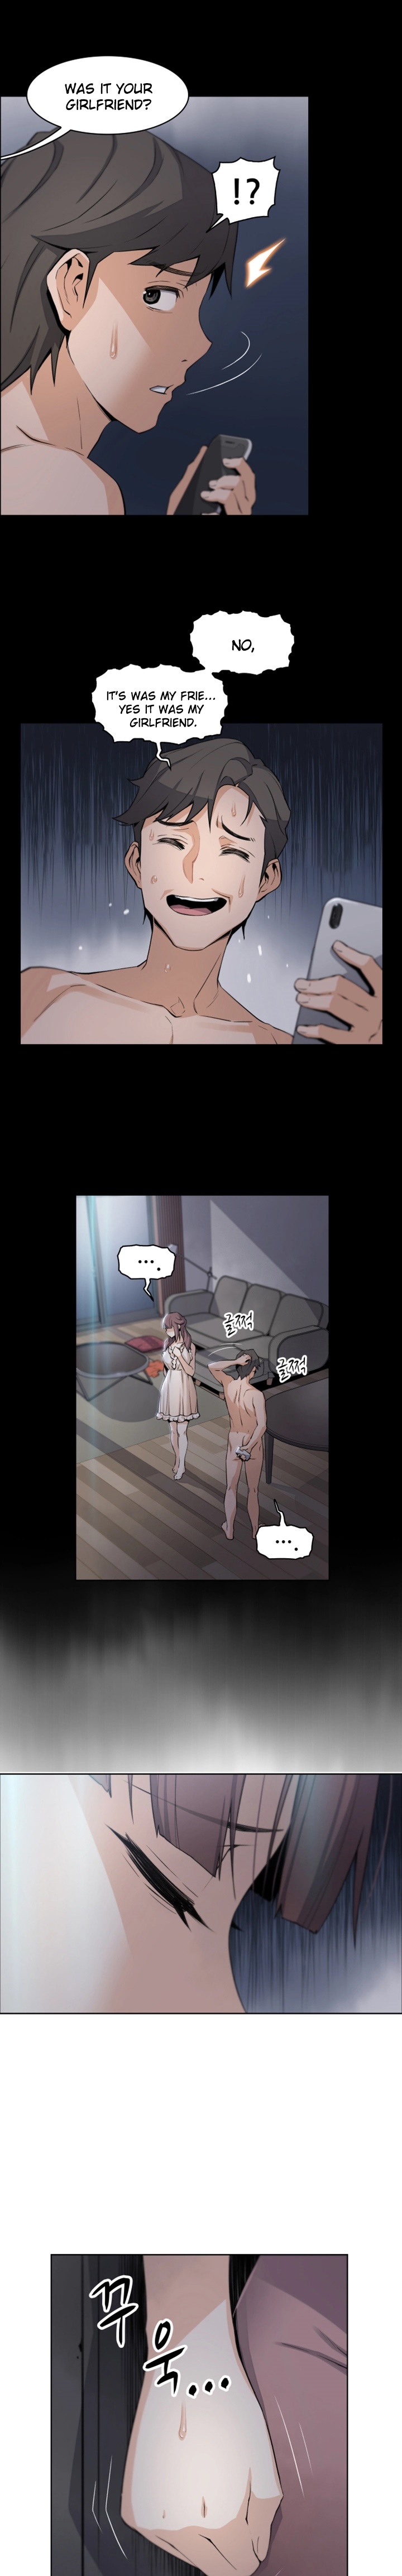 Housekeeper Manhwa - Chapter 13 Page 7